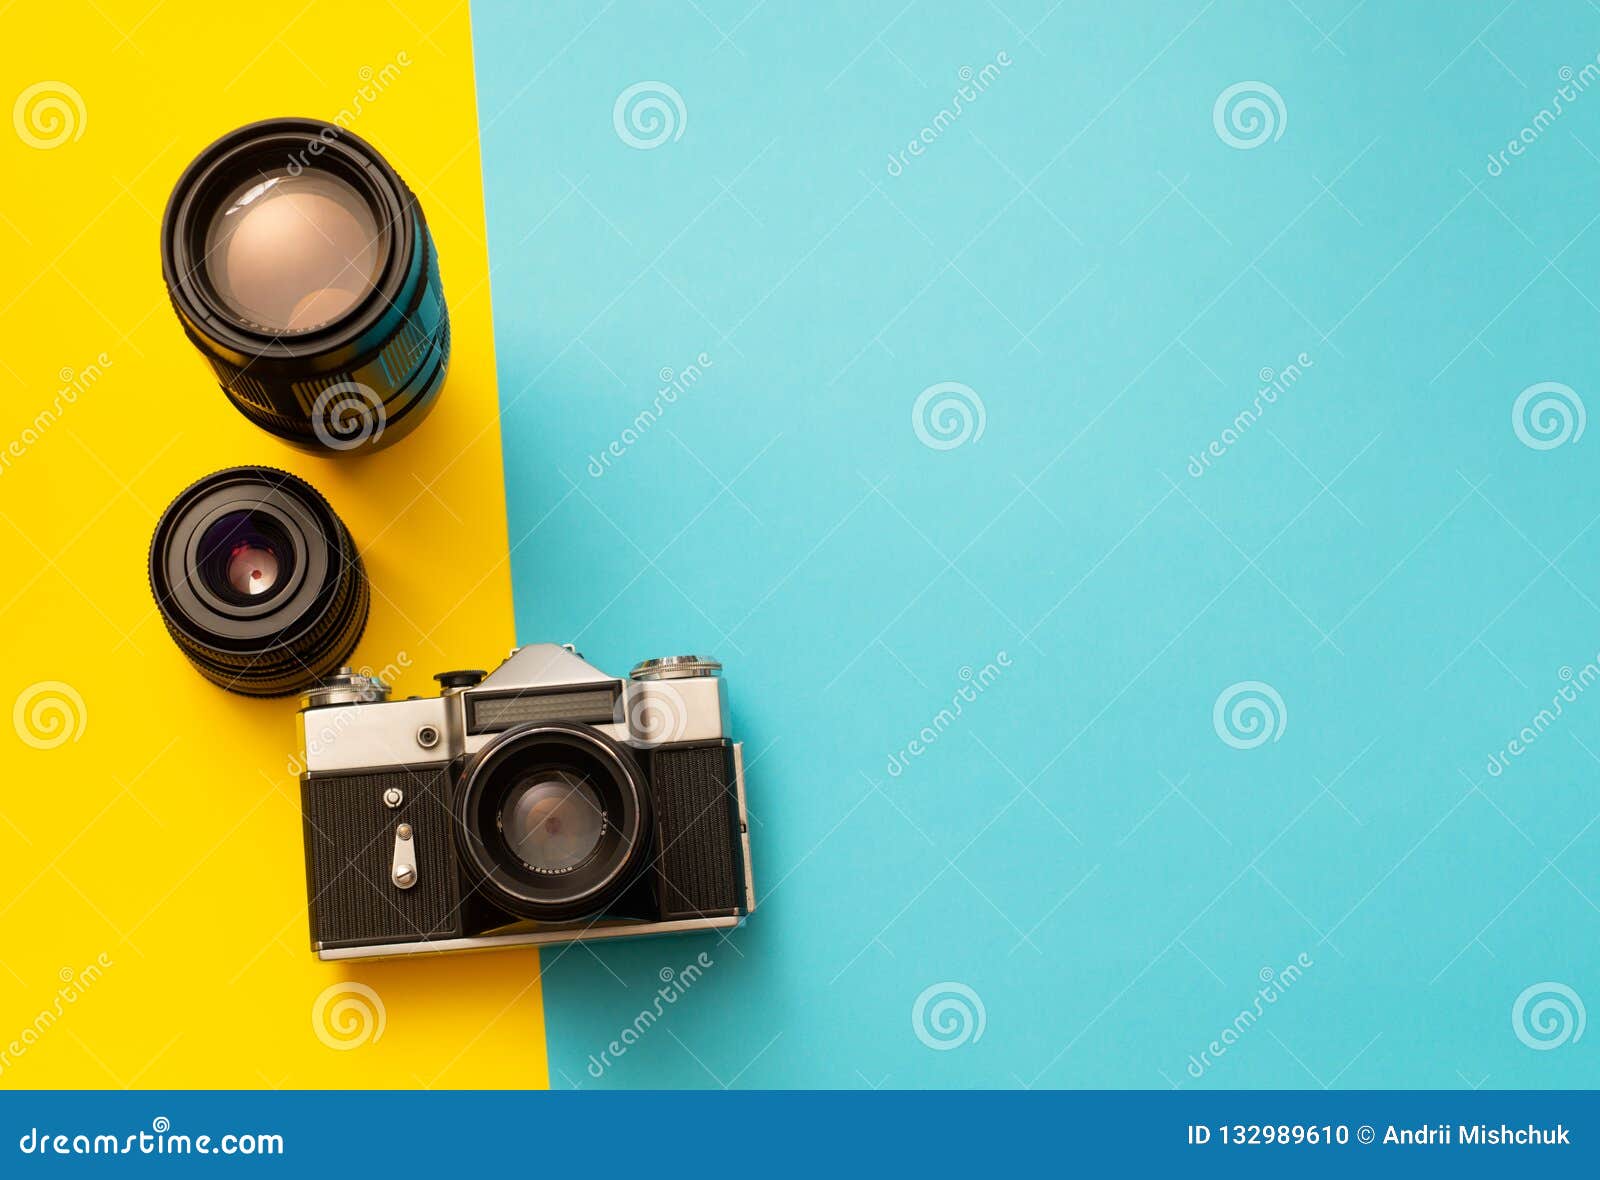 Photo Camera with Spare Lenses on Blue and Yellow Background Stock Photo -  Image of objective, flatlay: 132989610